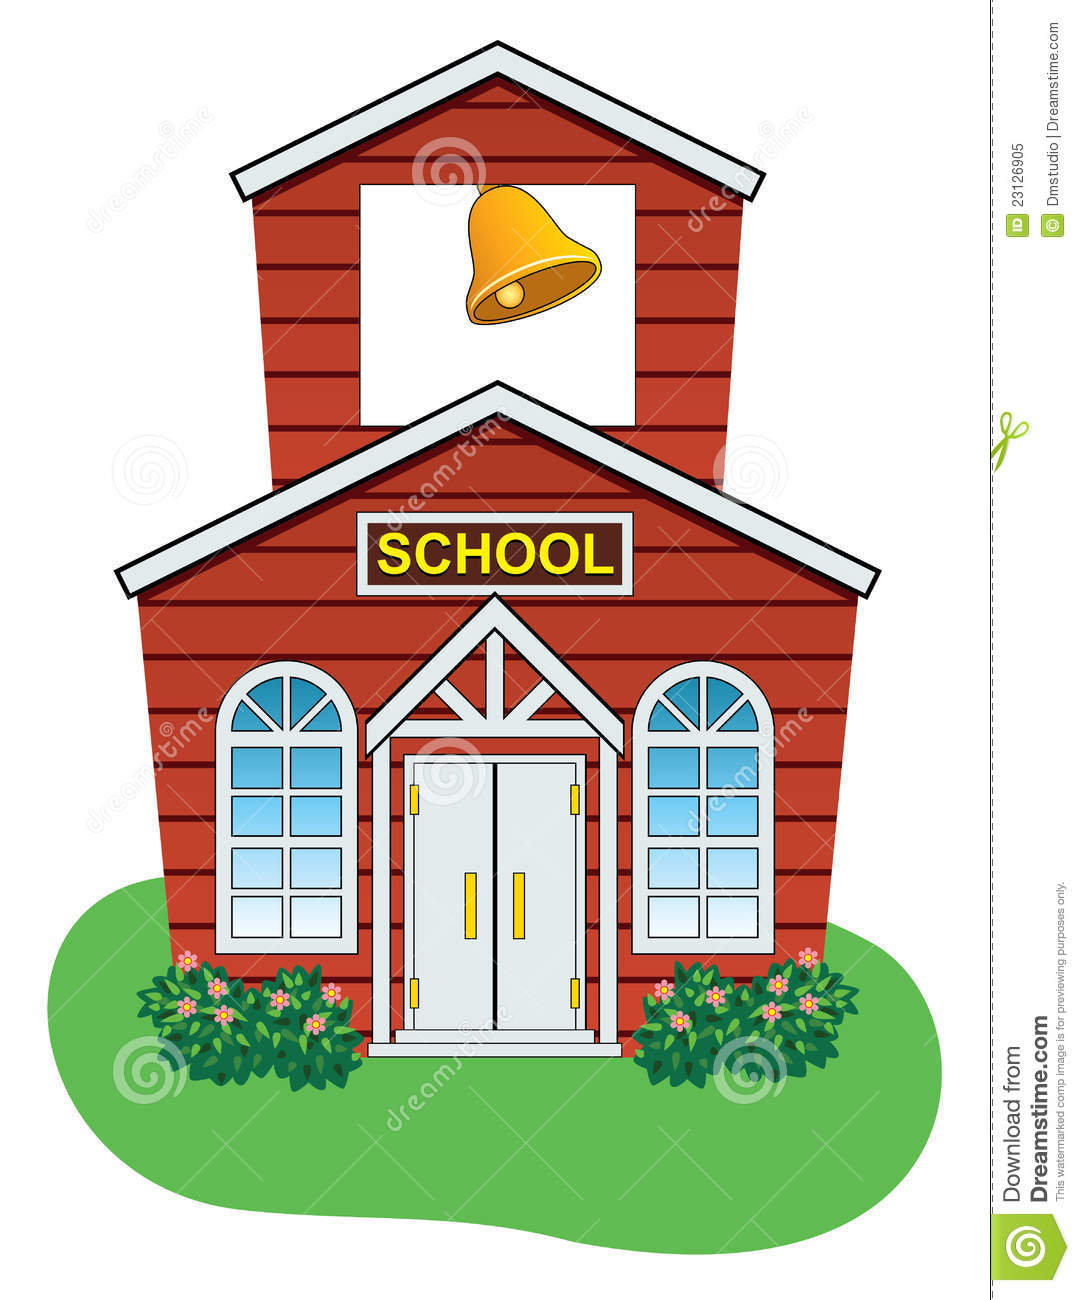 Vector Country School House Royalty Free Stock Photo   Image  23126905